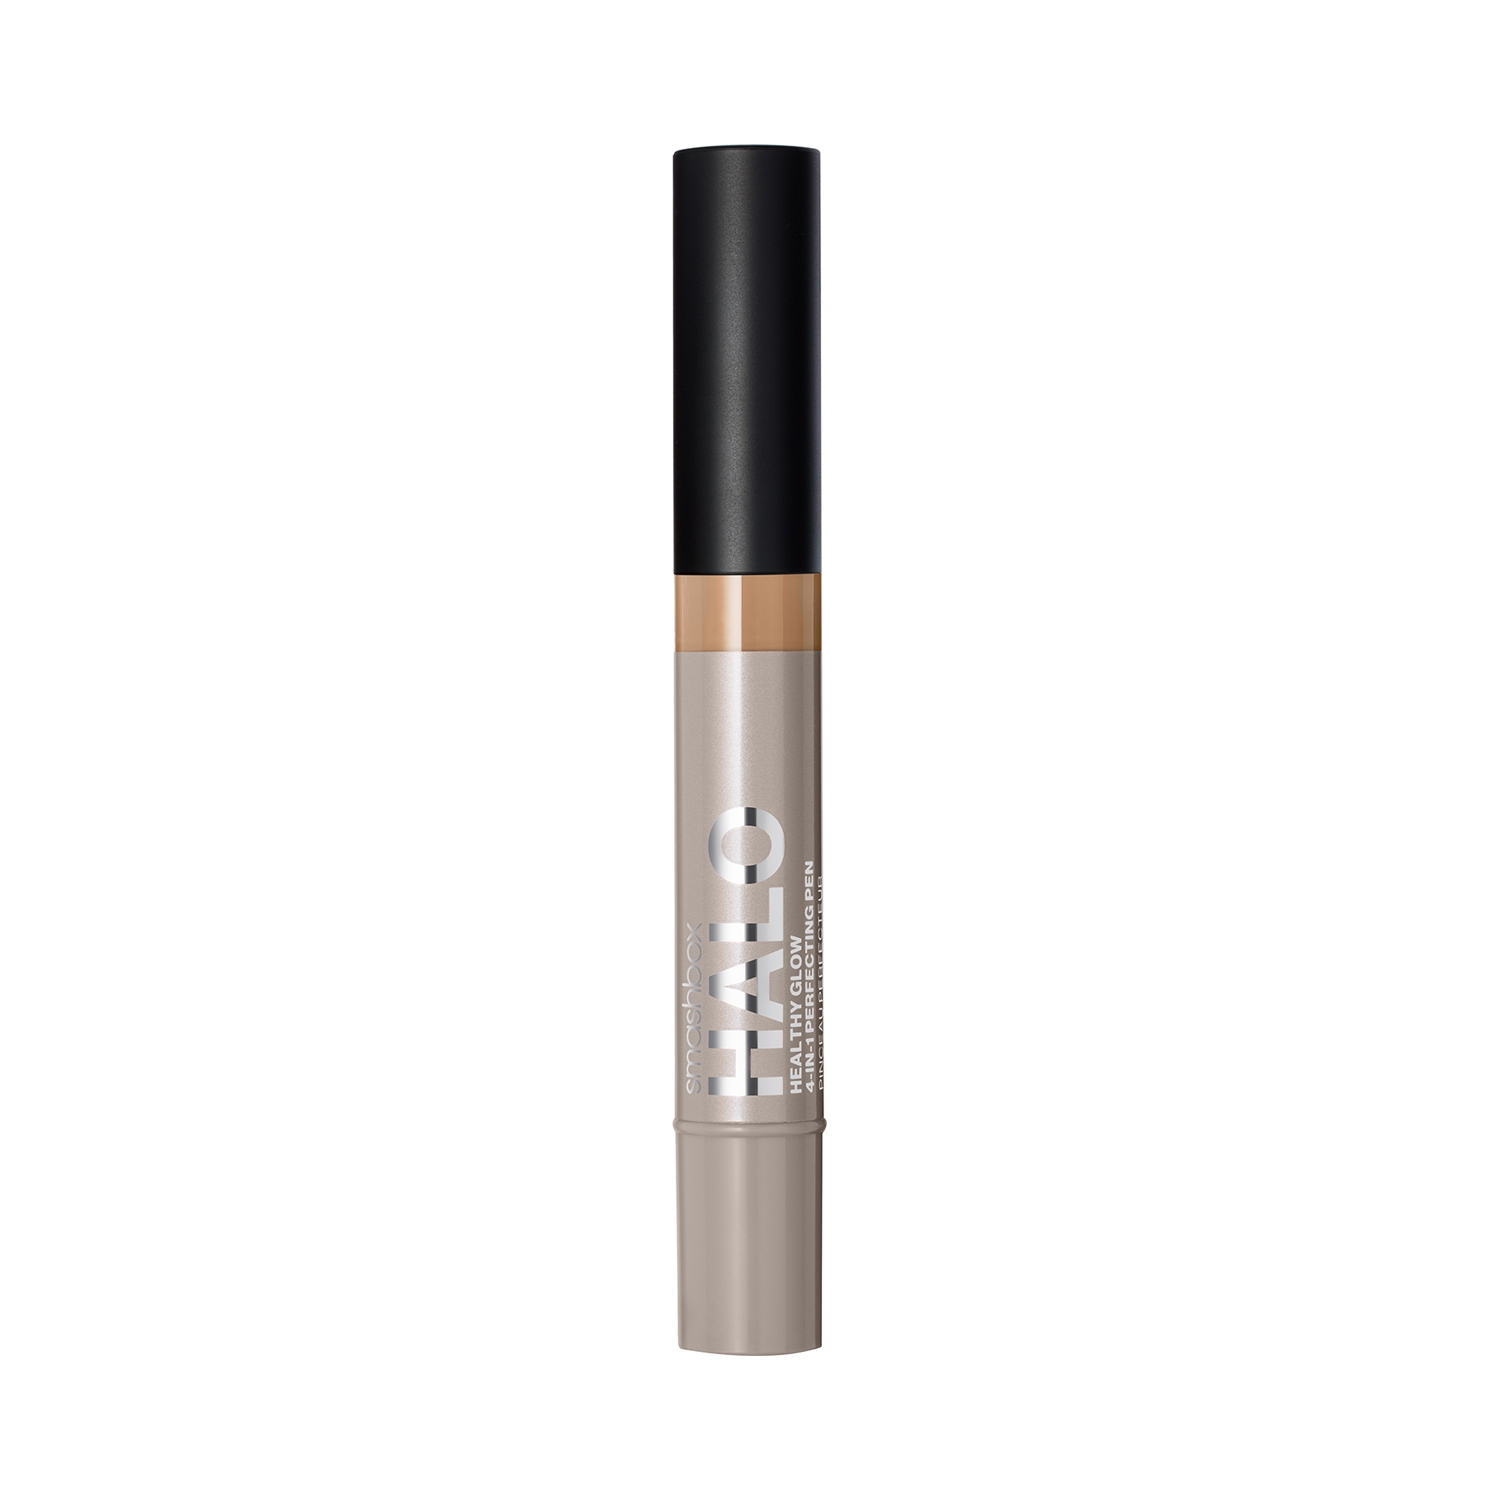 Smashbox | Smashbox Halo Healthy Glow 4-In-1 Perfecting Concealer Pen - L30N (3.5ml)